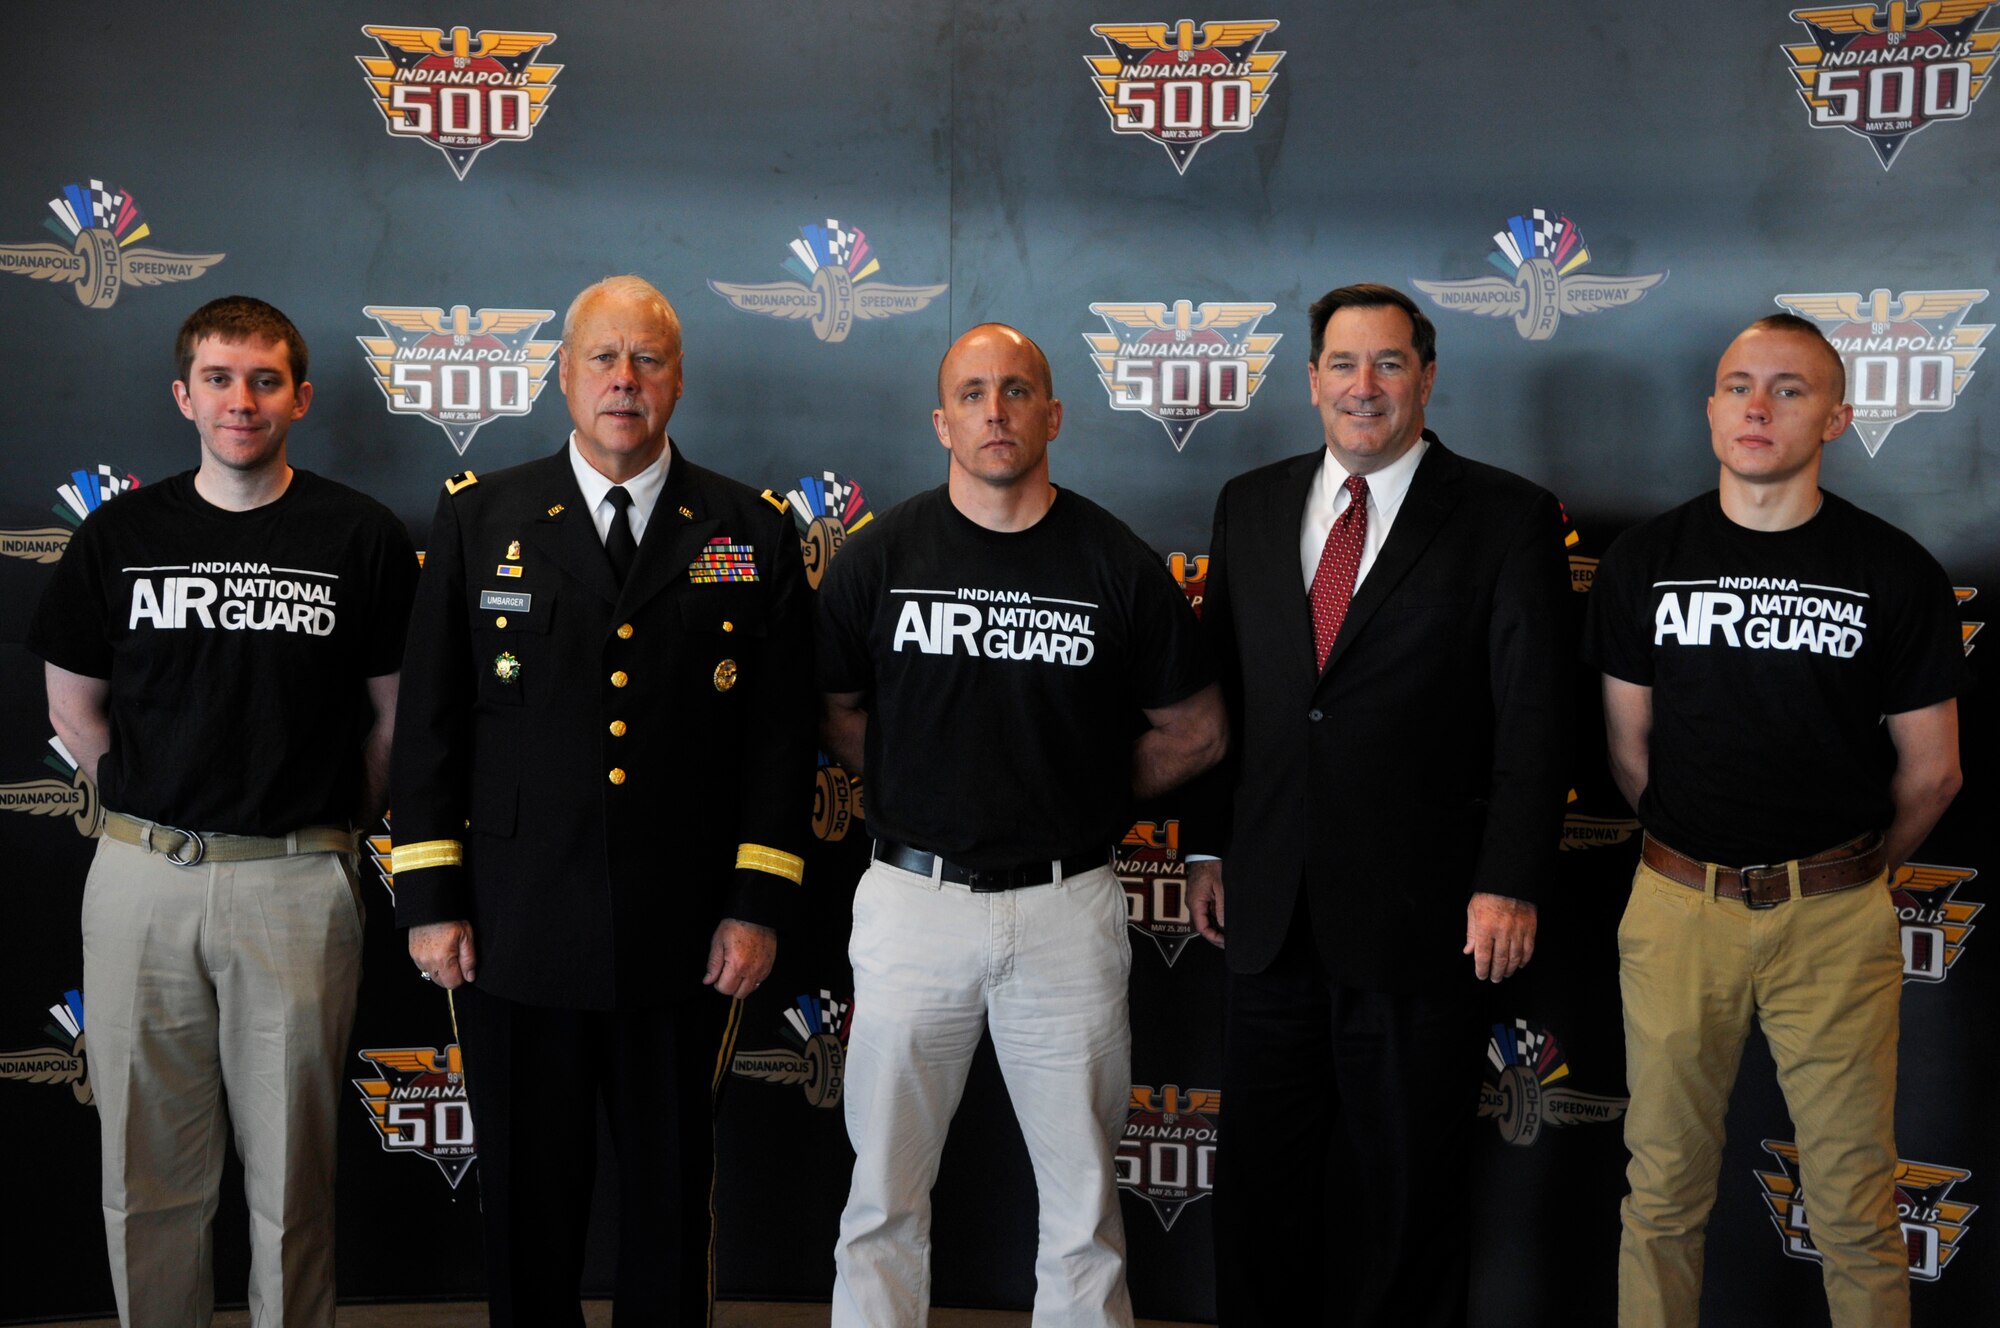 Trainees Timothy Barr (left), Patrick Affolder (center) and Taylor Affolder (right) from the 122nd Fighter Wing, Fort Wayne Air National Guard Base, pose with Senator Joe Donnelly and Maj. General R. Martin Umbarger, the Adjutant General of Indiana on May 18,2014 at the Indianapolis Motor Speedway. Statewide military recruits were in attendance for a mass enlistment ceremony held annually at the speedway during Armed Forces Weekend. (Air National Guard photo by Airman 1st Class Justin Andras/Released)